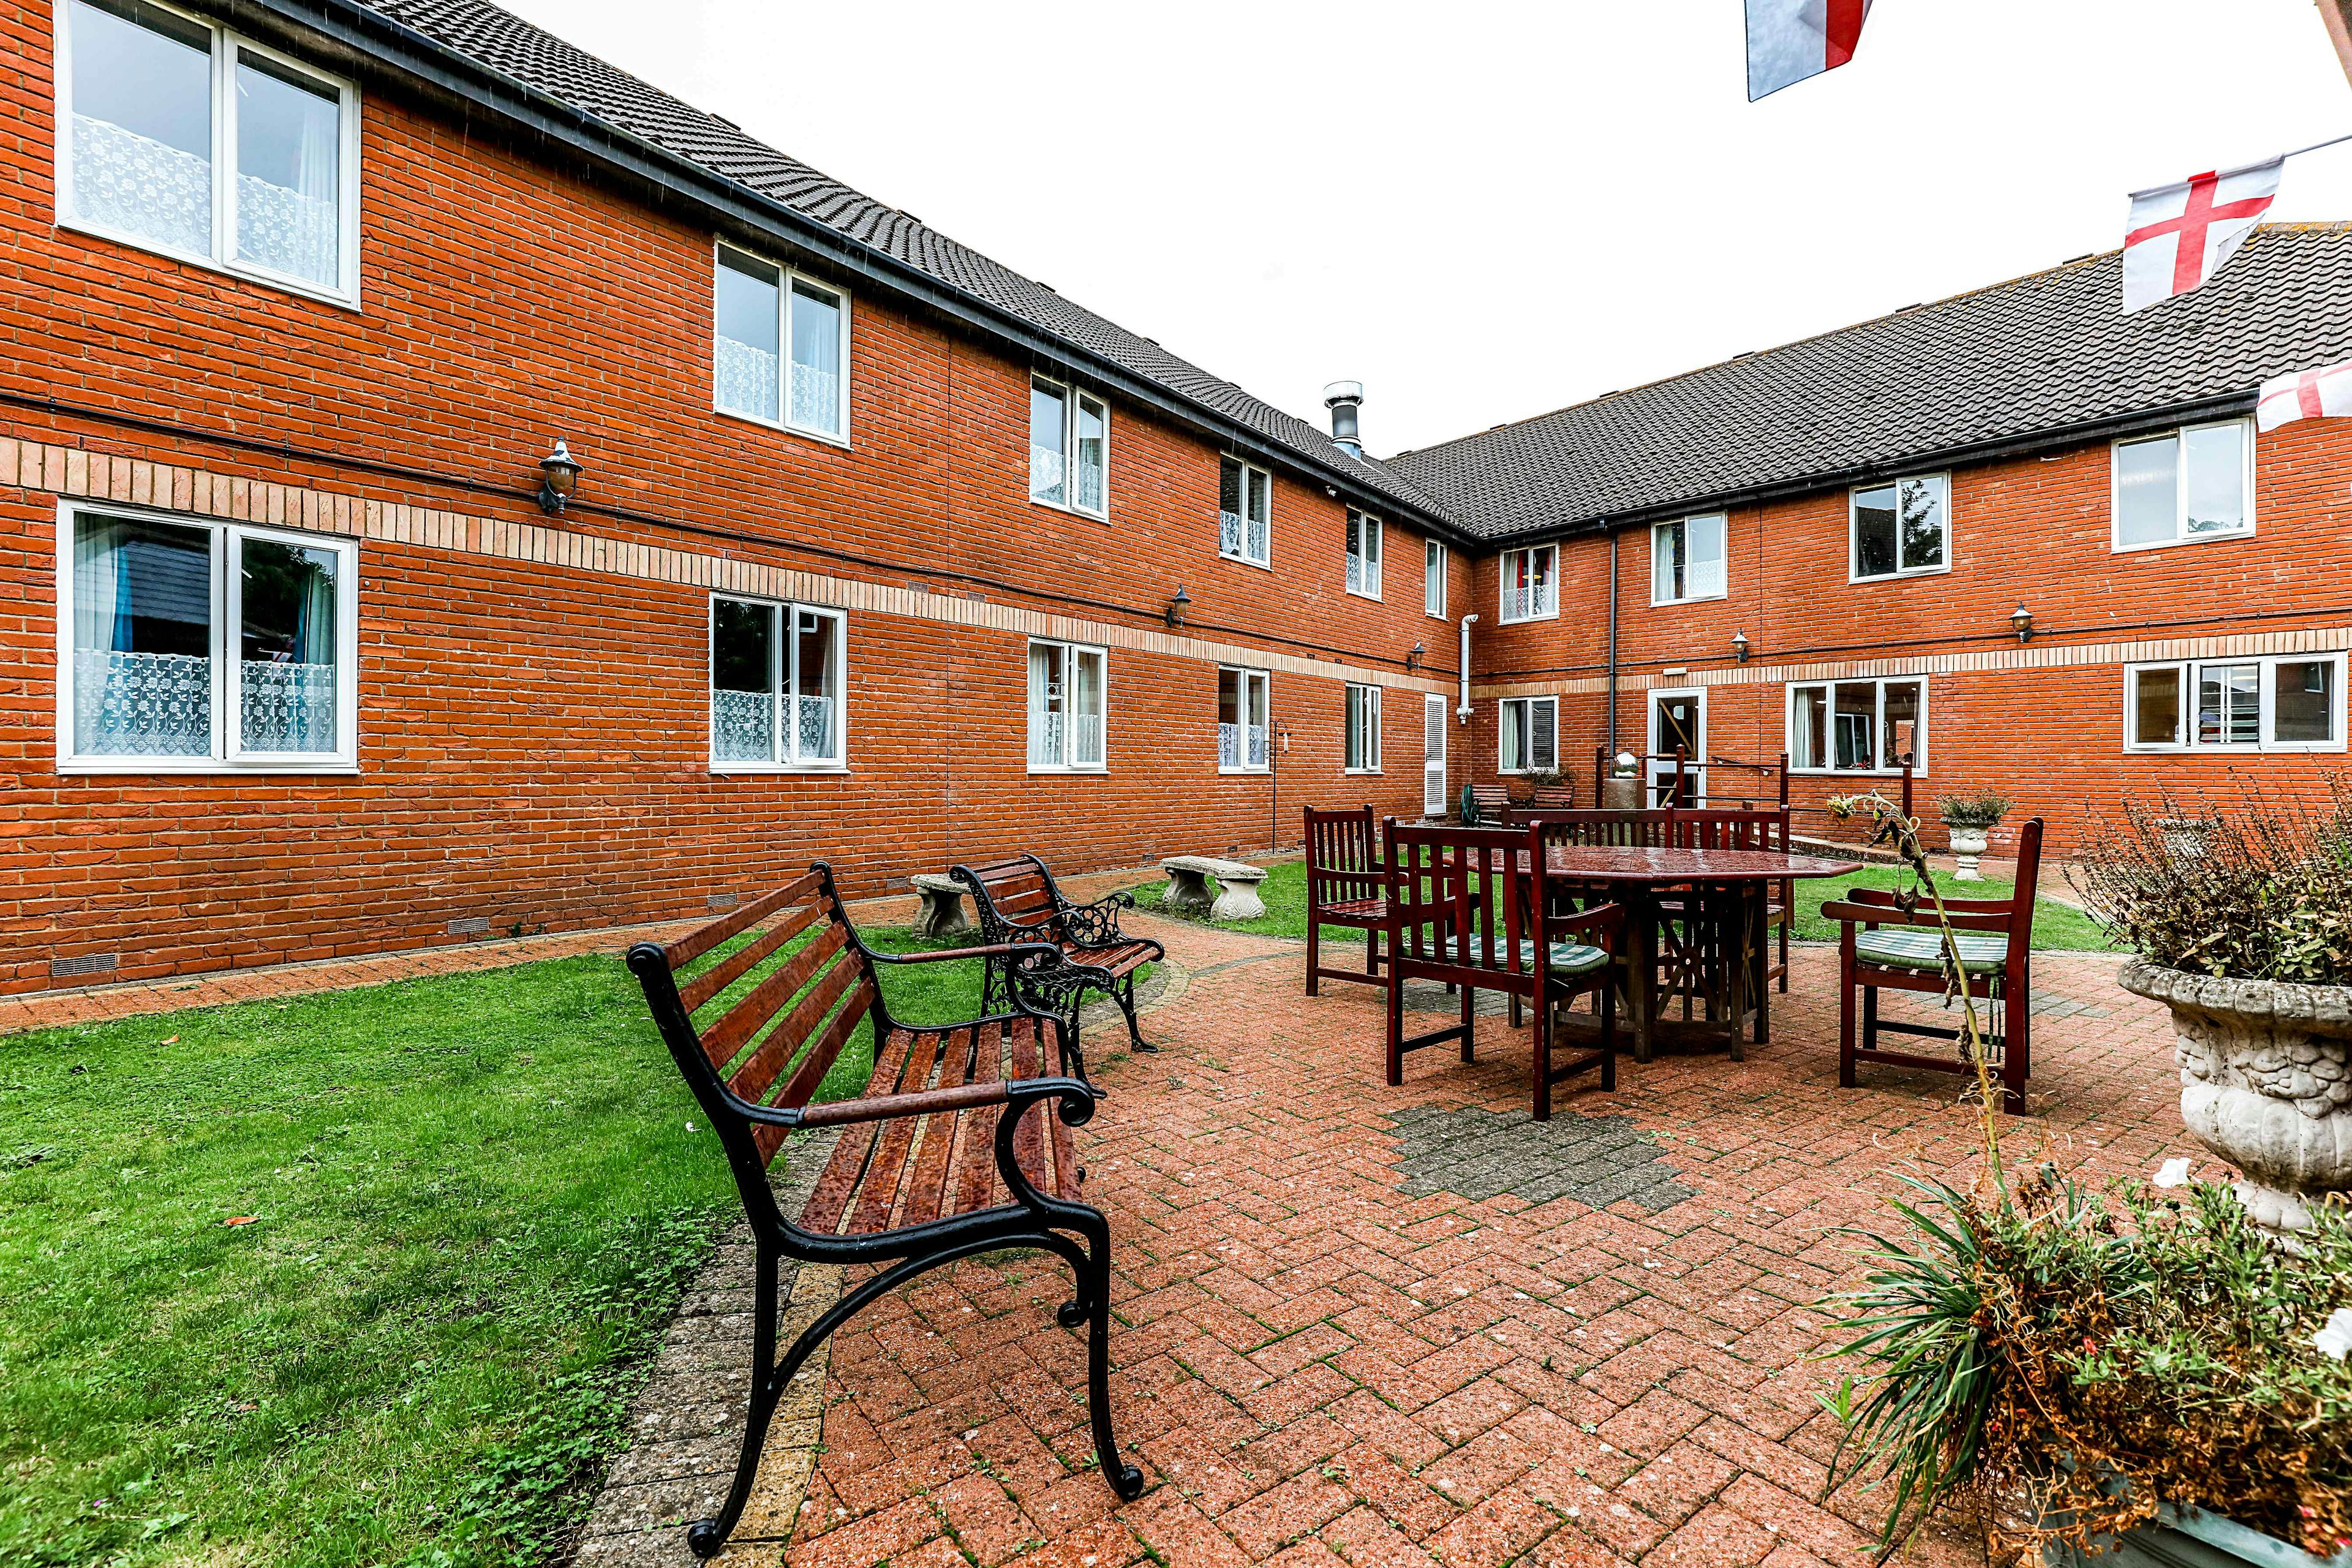 Minster Care Group - Grenville Court care home 9